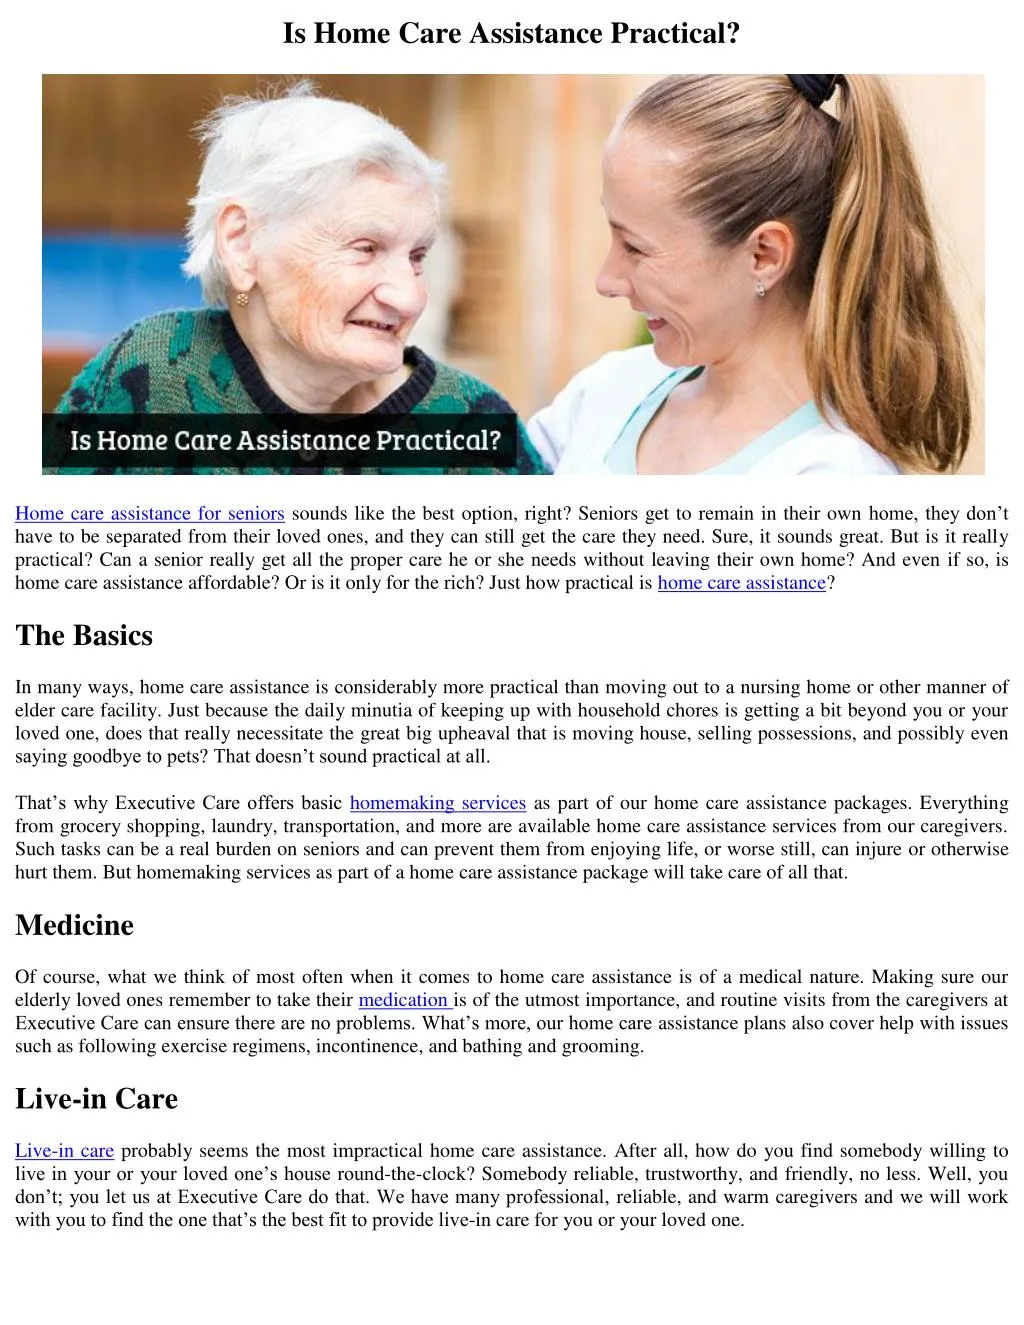 is home care assistance practical